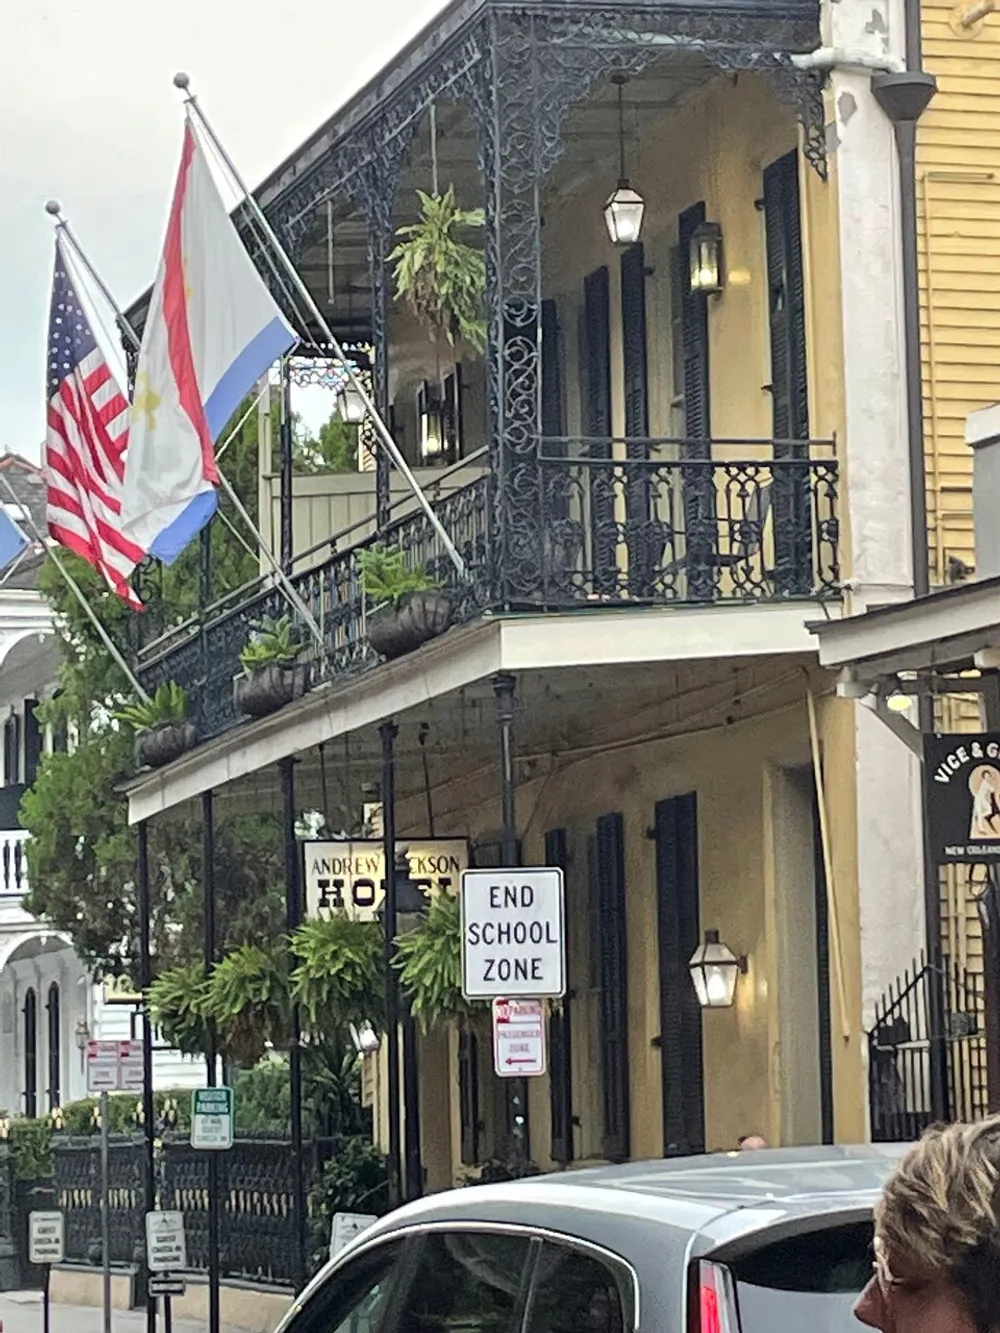 The image shows an ornate balcony on a historic building flying American and other flags with a street sign in front reading END SCHOOL ZONE indicative of the area likely being near a school